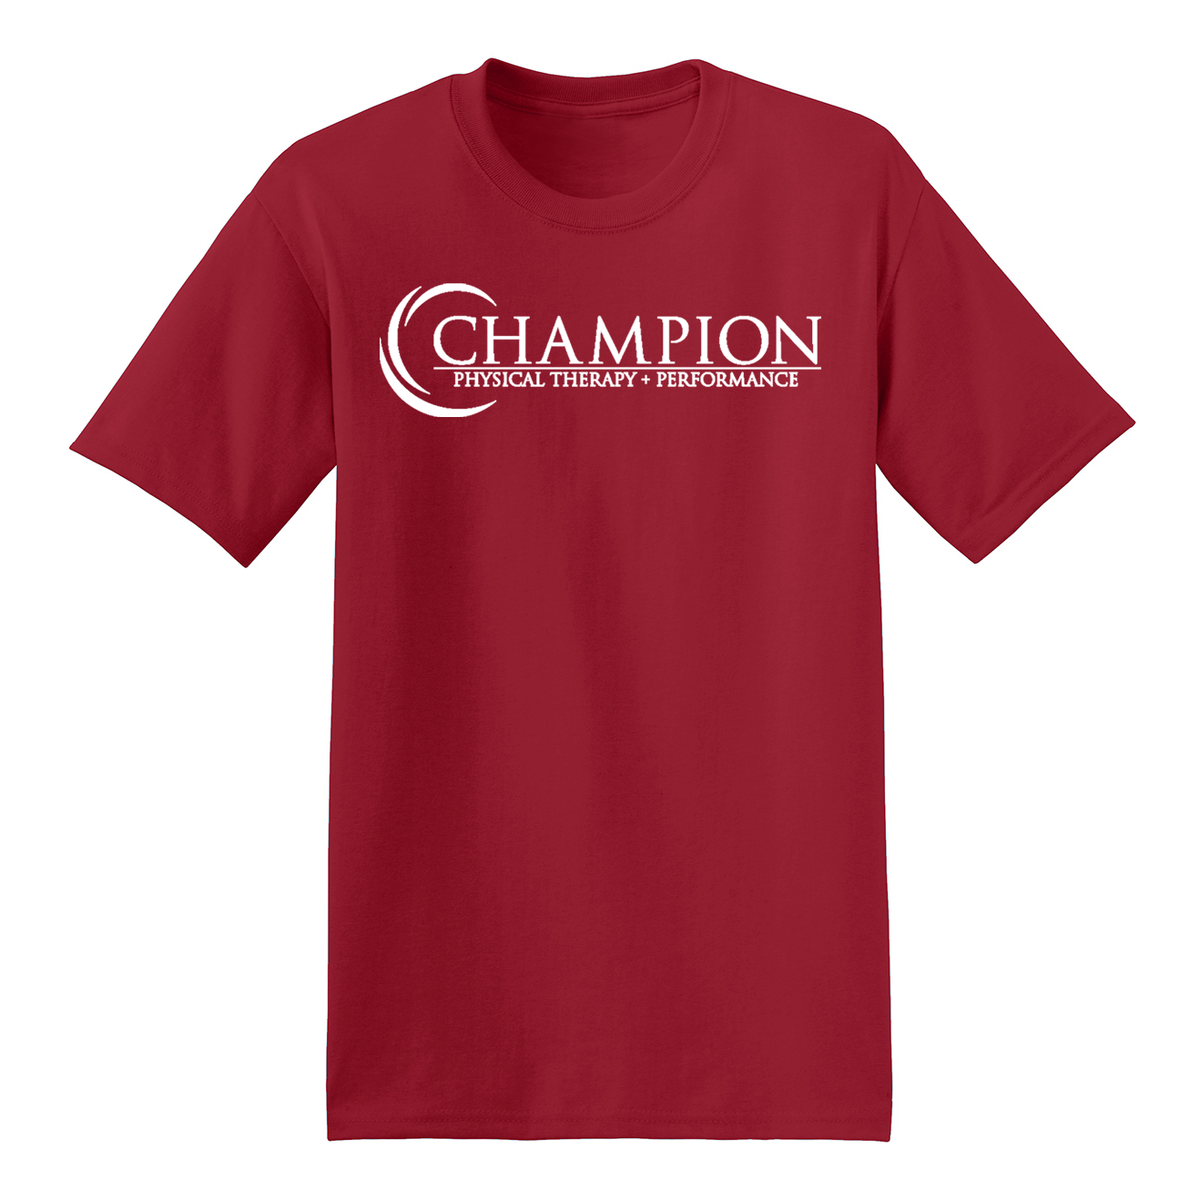 Champion Physical Therapy T-Shirt